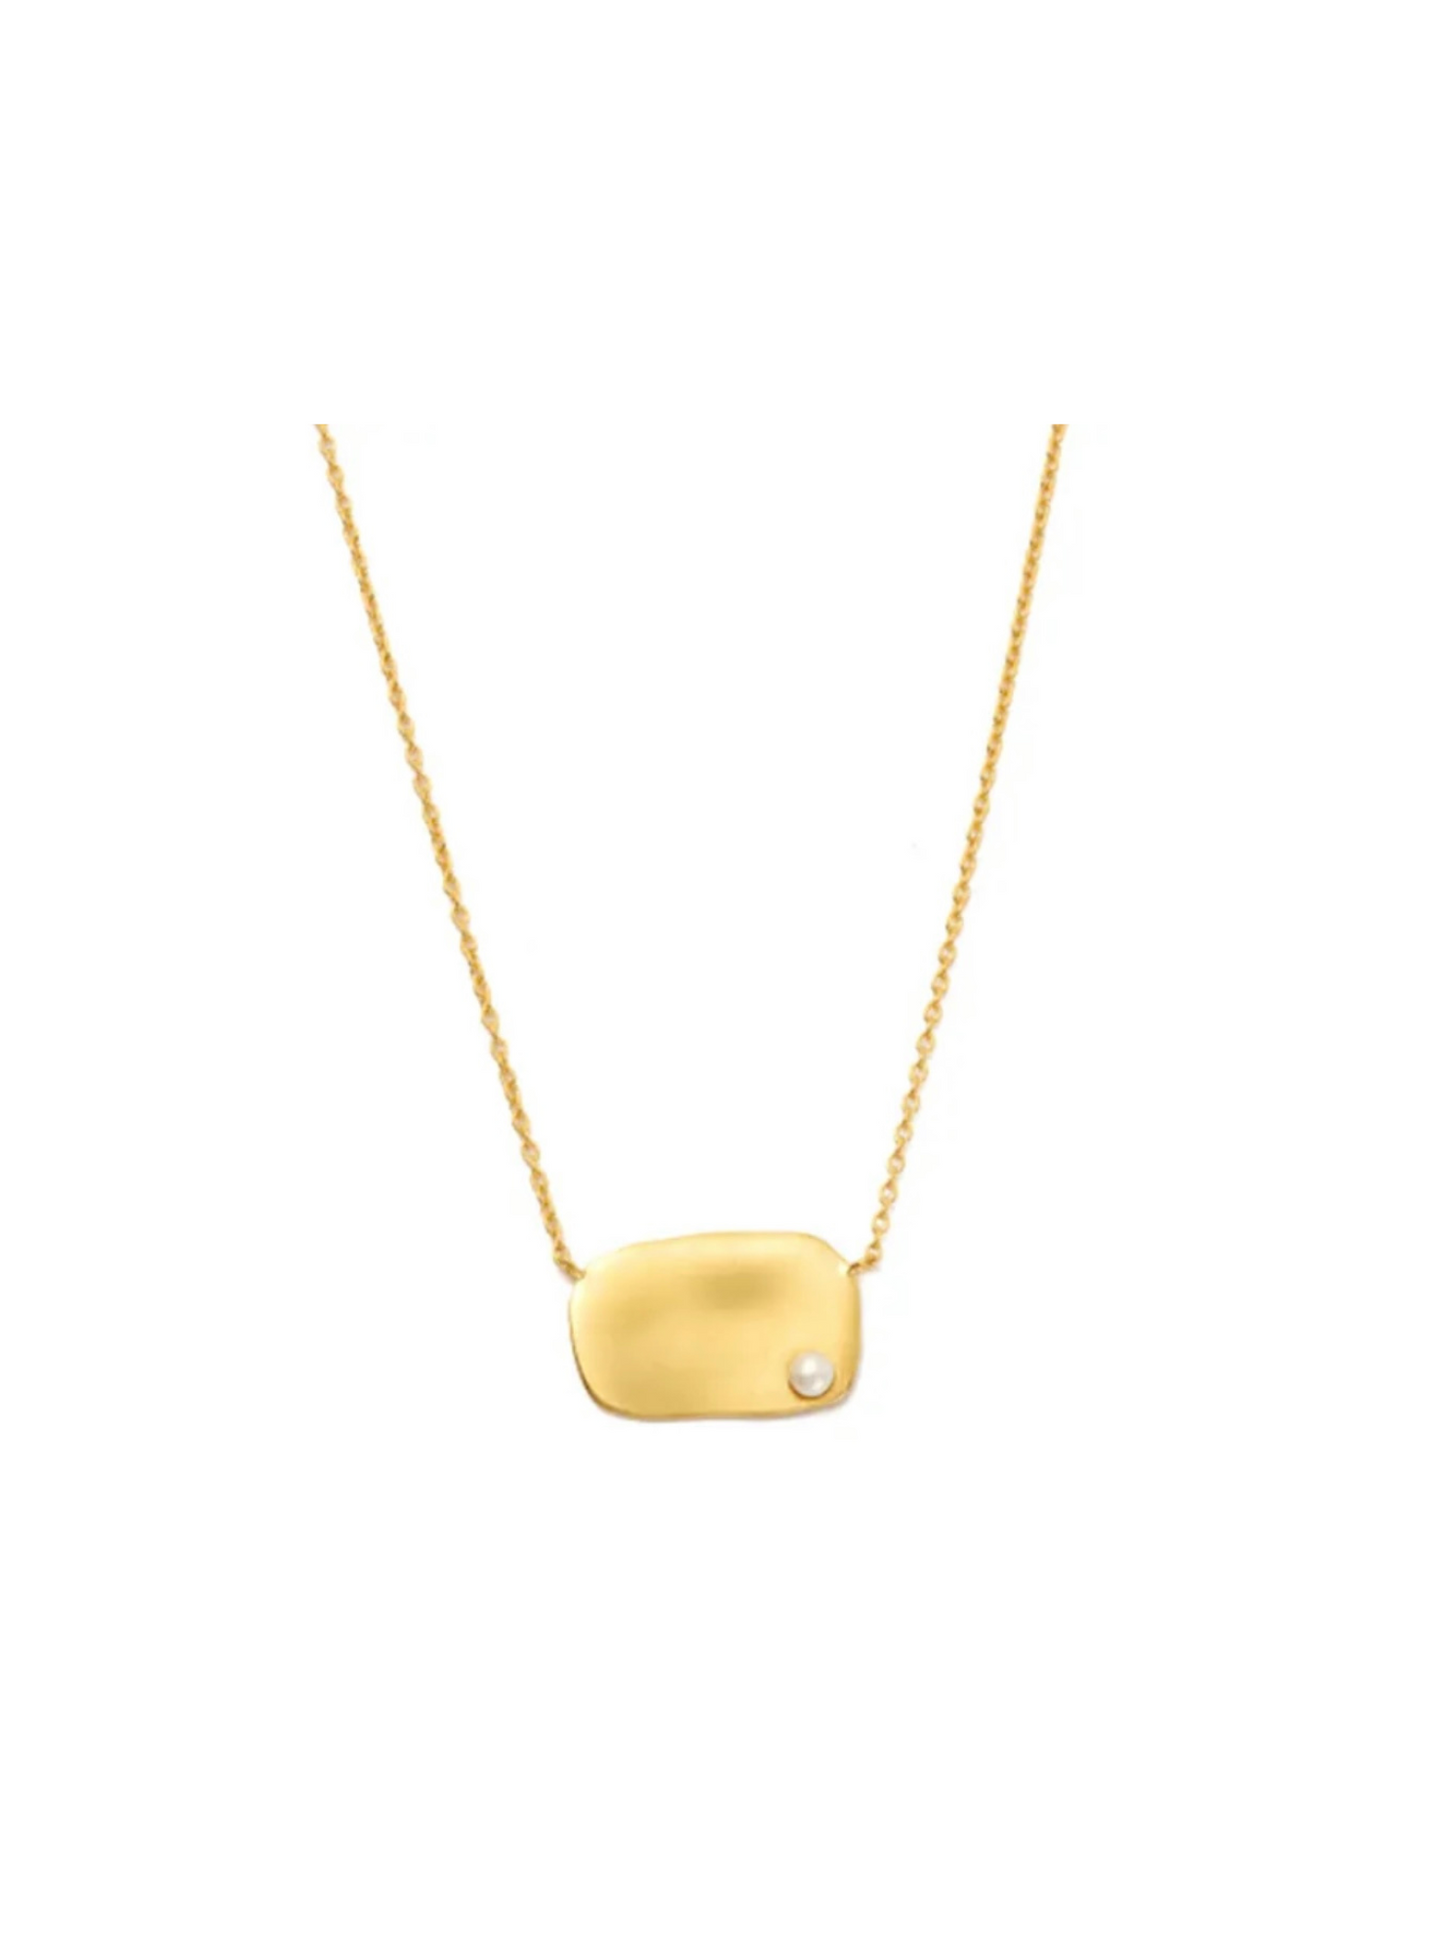 Freshwater pearl 14k gold plated pendant necklace